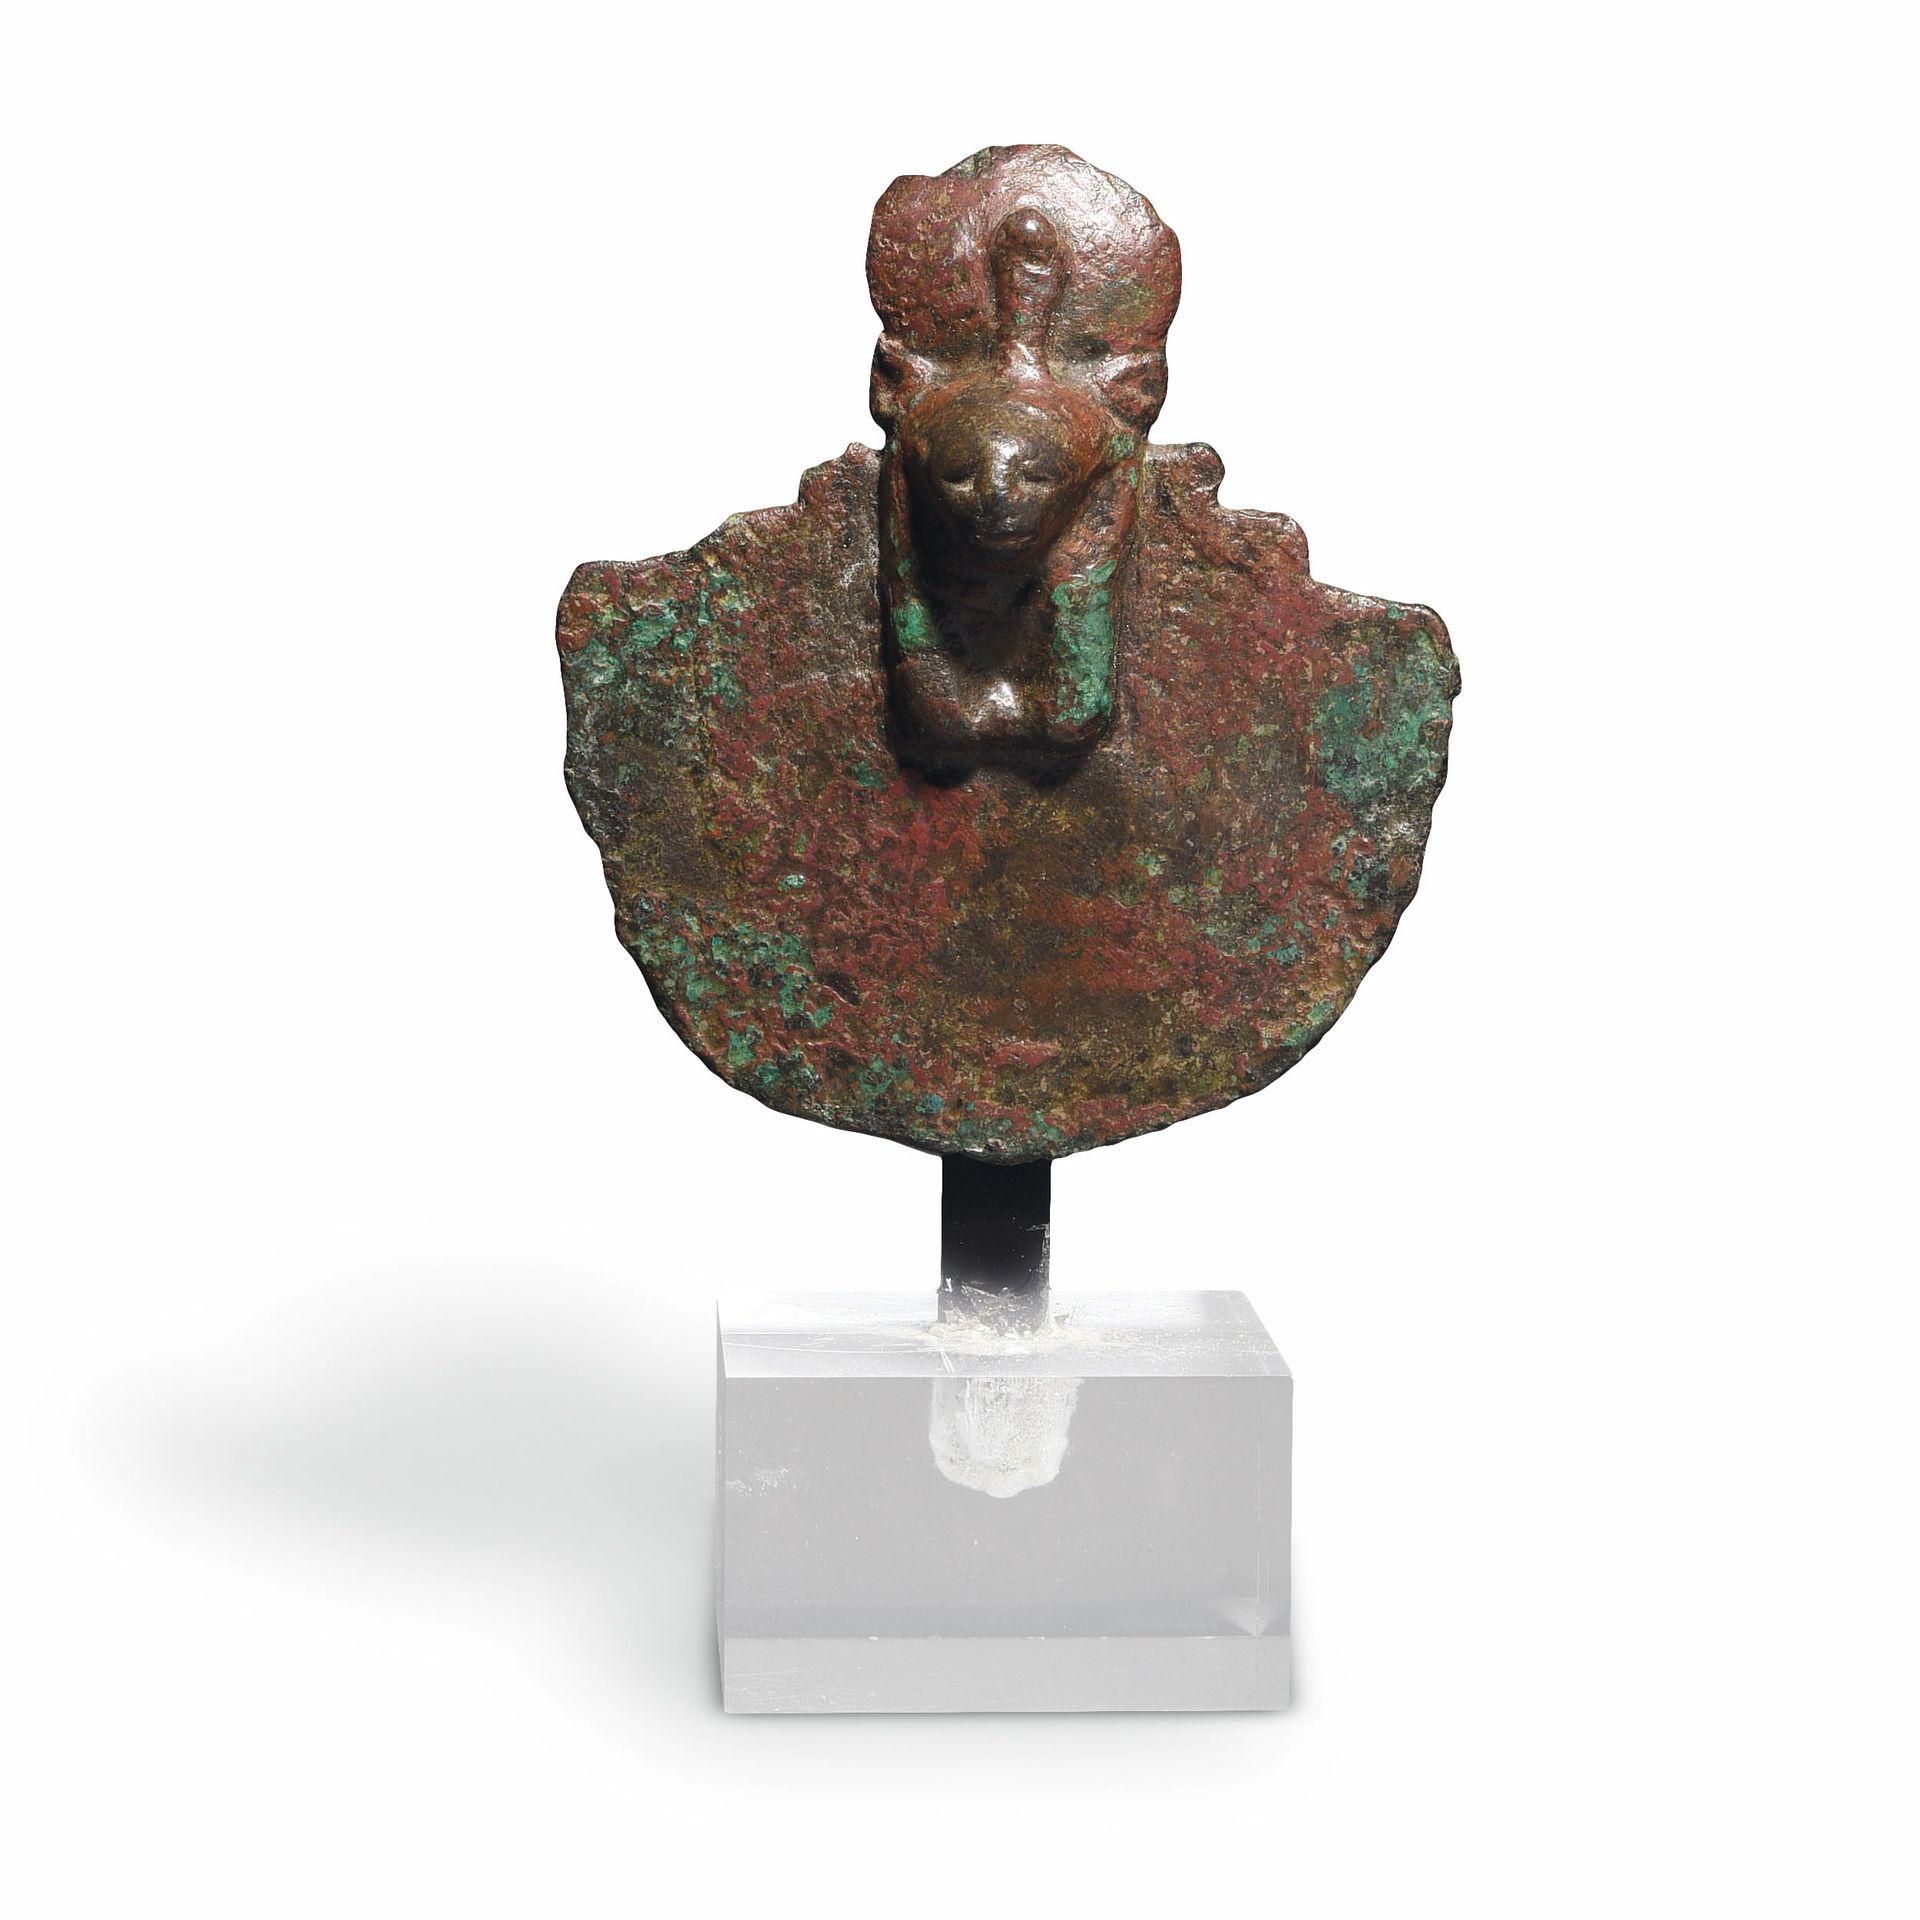 Null AEGIS OF SEKHMET

Egypt, Late Period, 664-332 B.C. 

Bronze with green and &hellip;